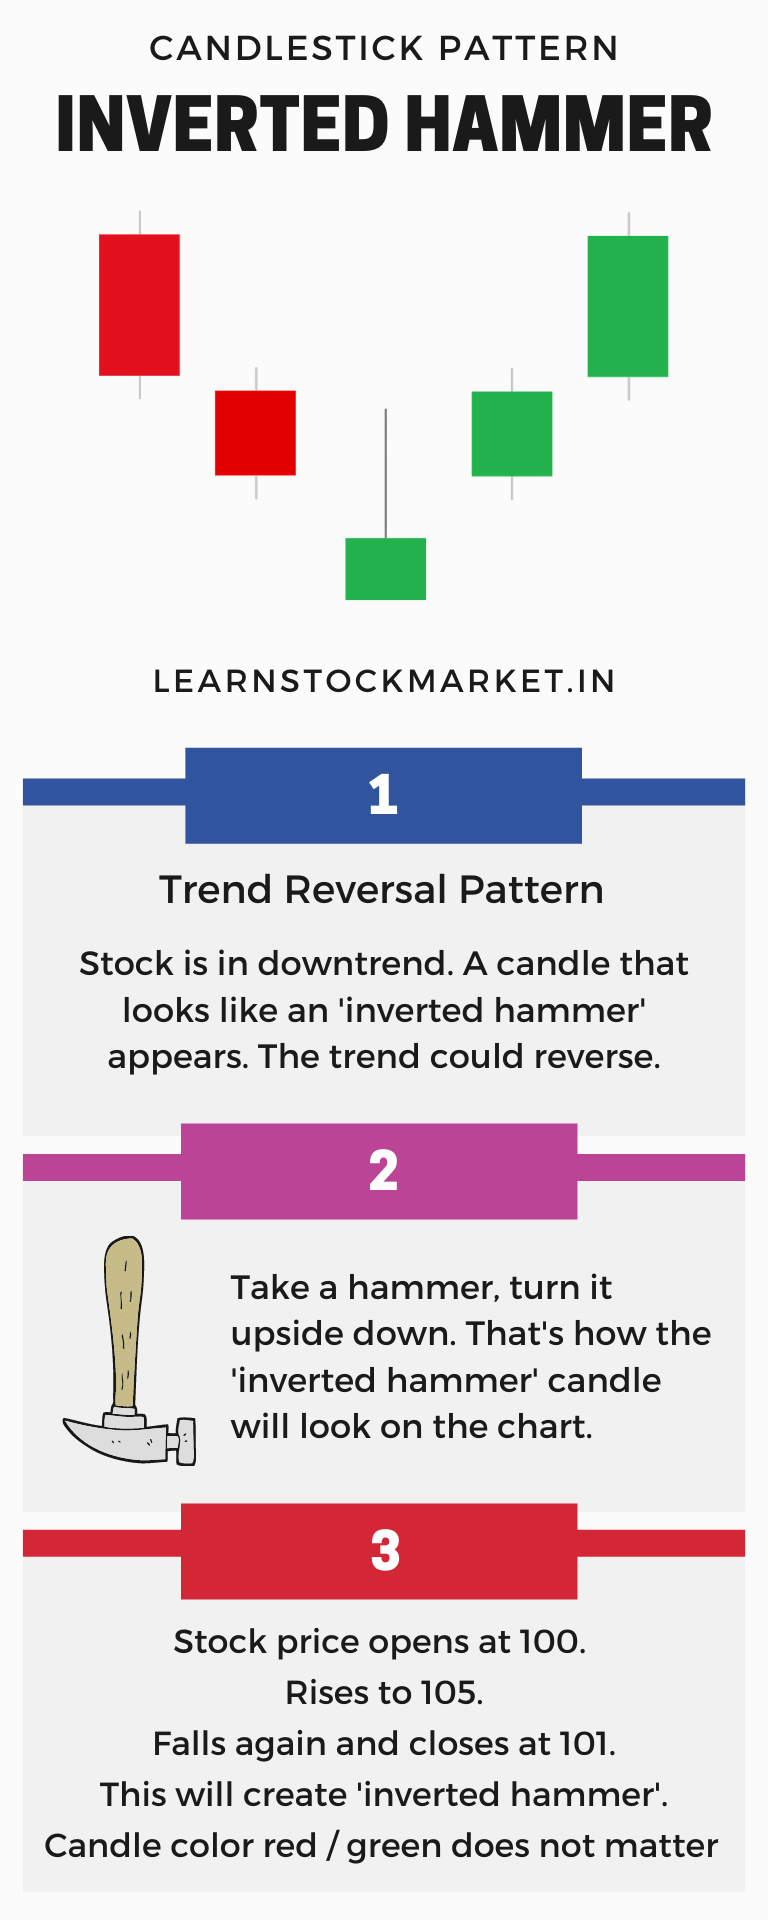 Inverted Hammer Candle Technical Analysis